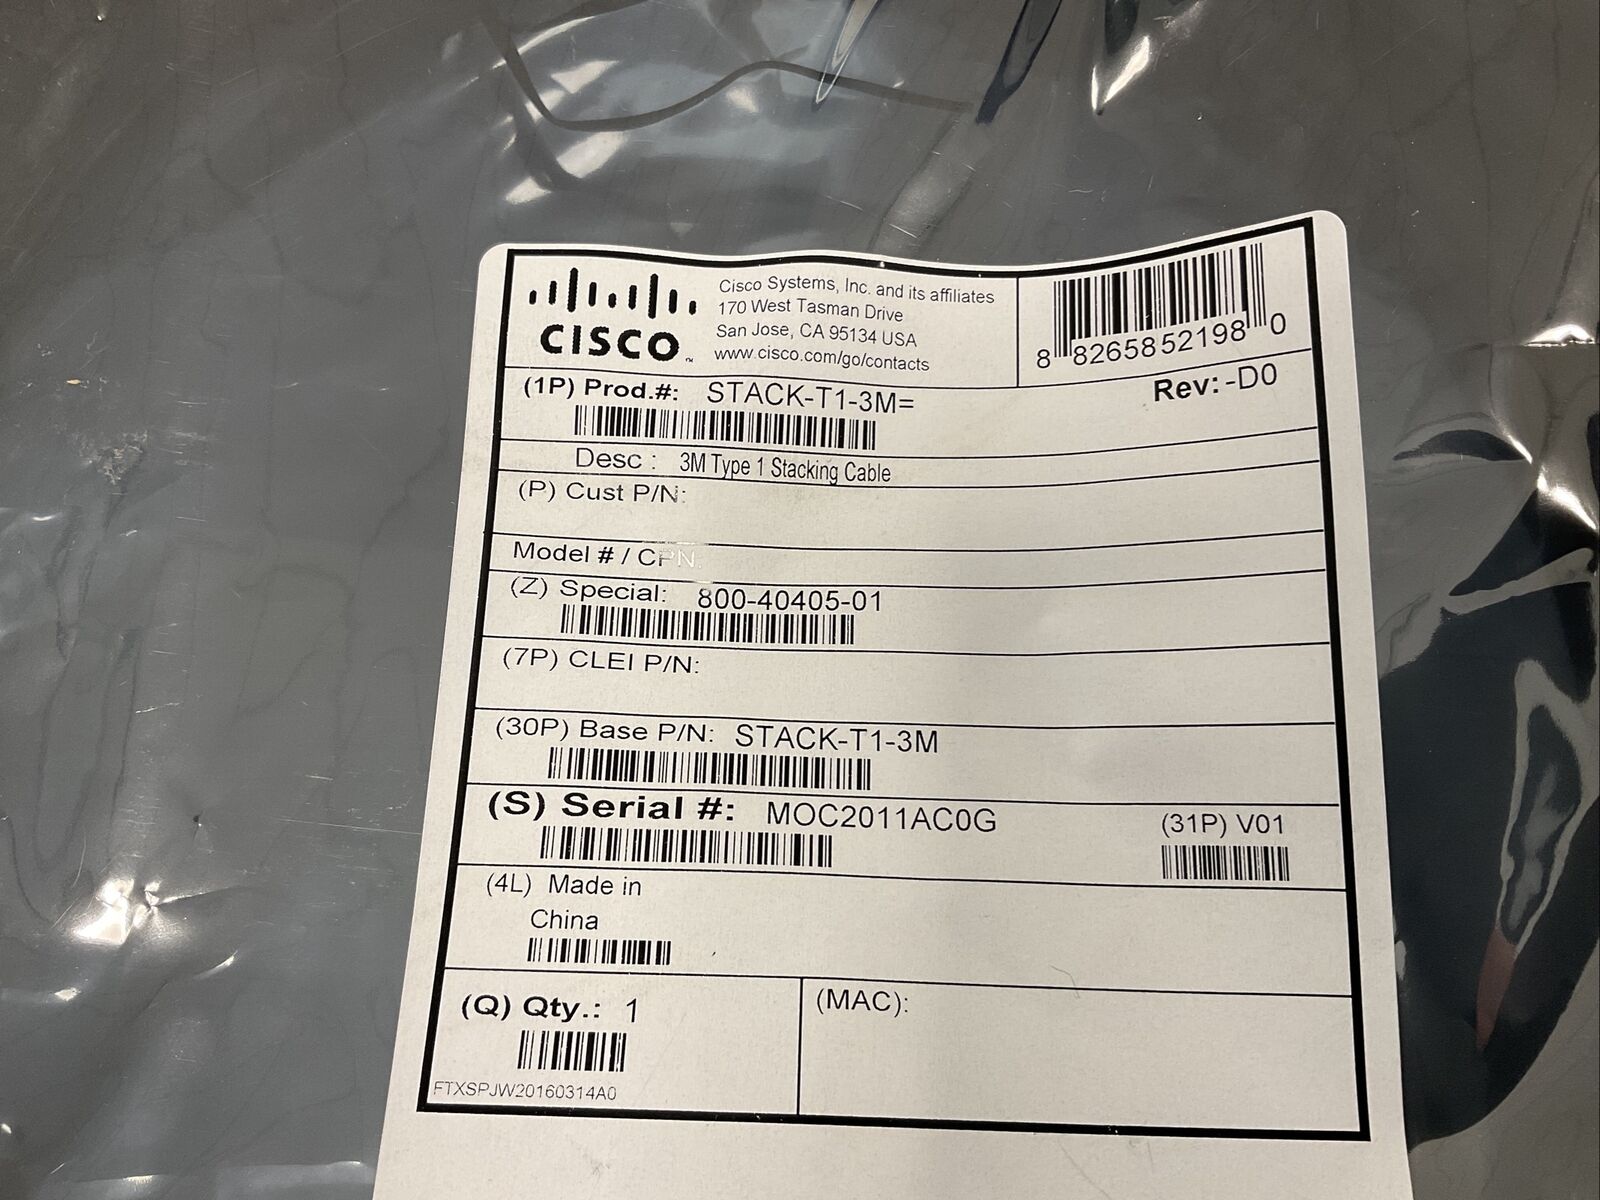 Cisco STACK-T1-3M Type 1 Stacking Cable Factory Sealed Brand New